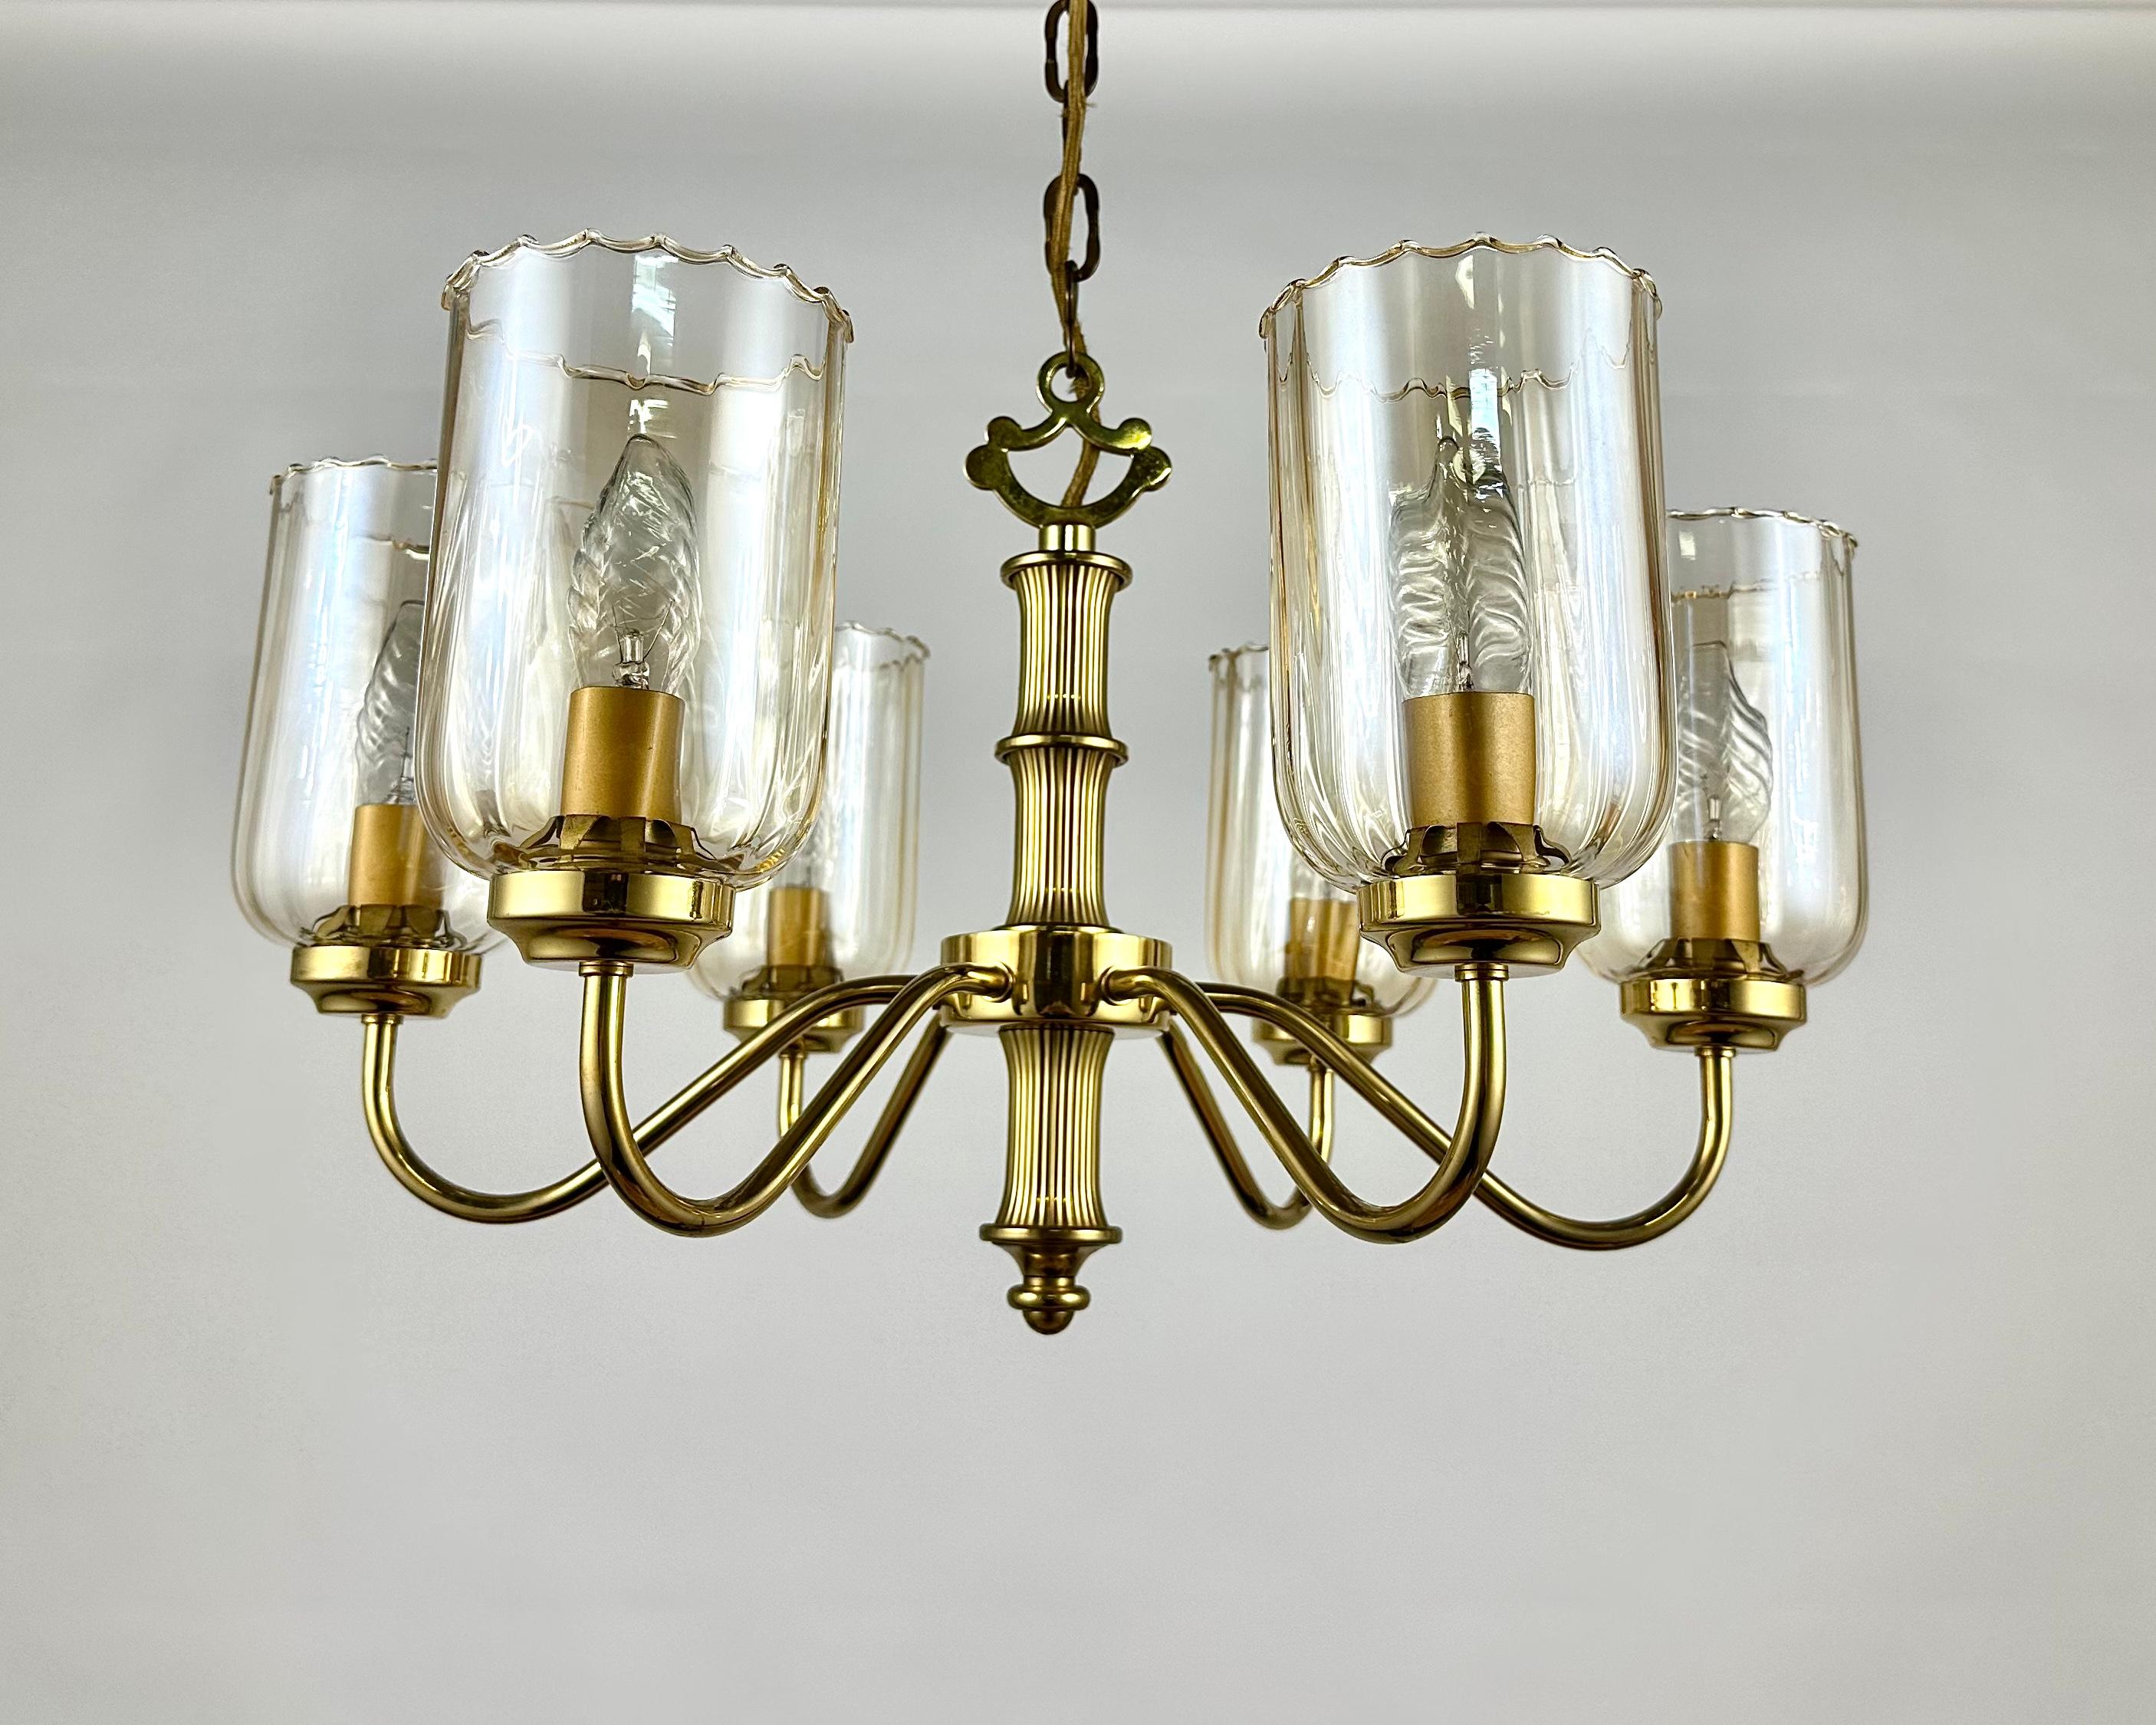 Vintage Ceiling Chandelier With Six Glass Lampshades, Germany, 1970s In Excellent Condition For Sale In Bastogne, BE